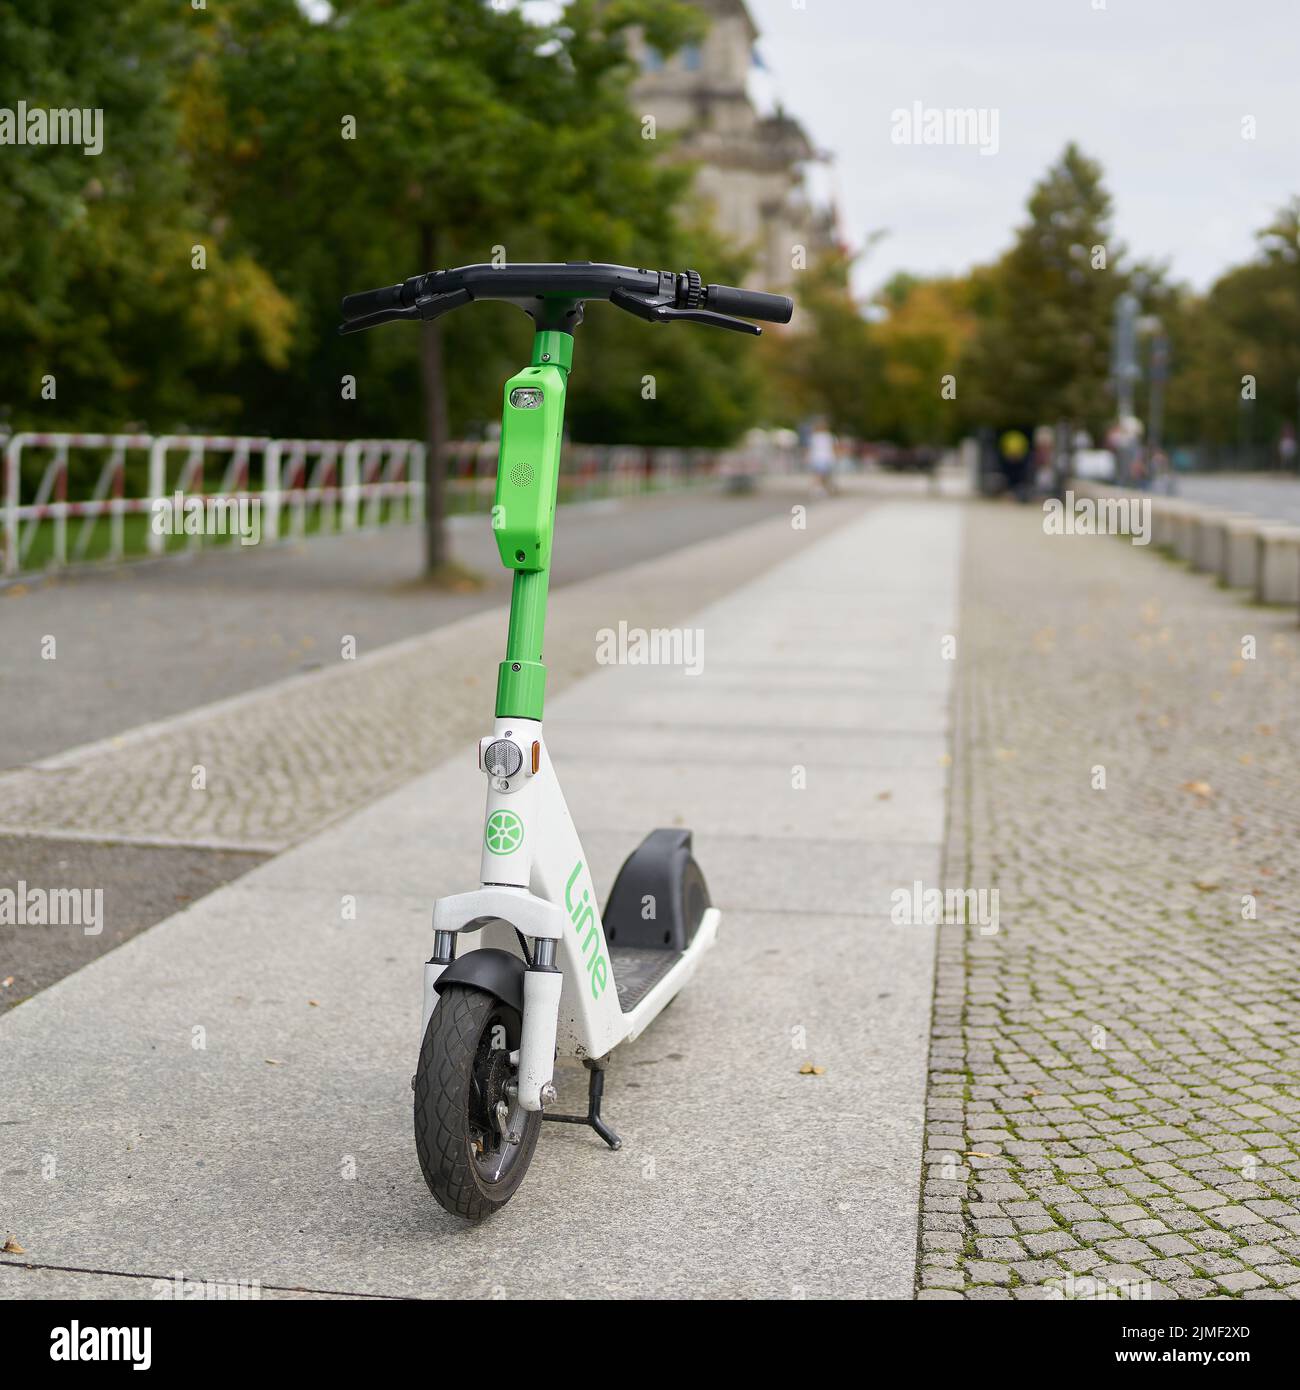 Parked e-scooter of the Lime group in the city center of Berlin Stock Photo